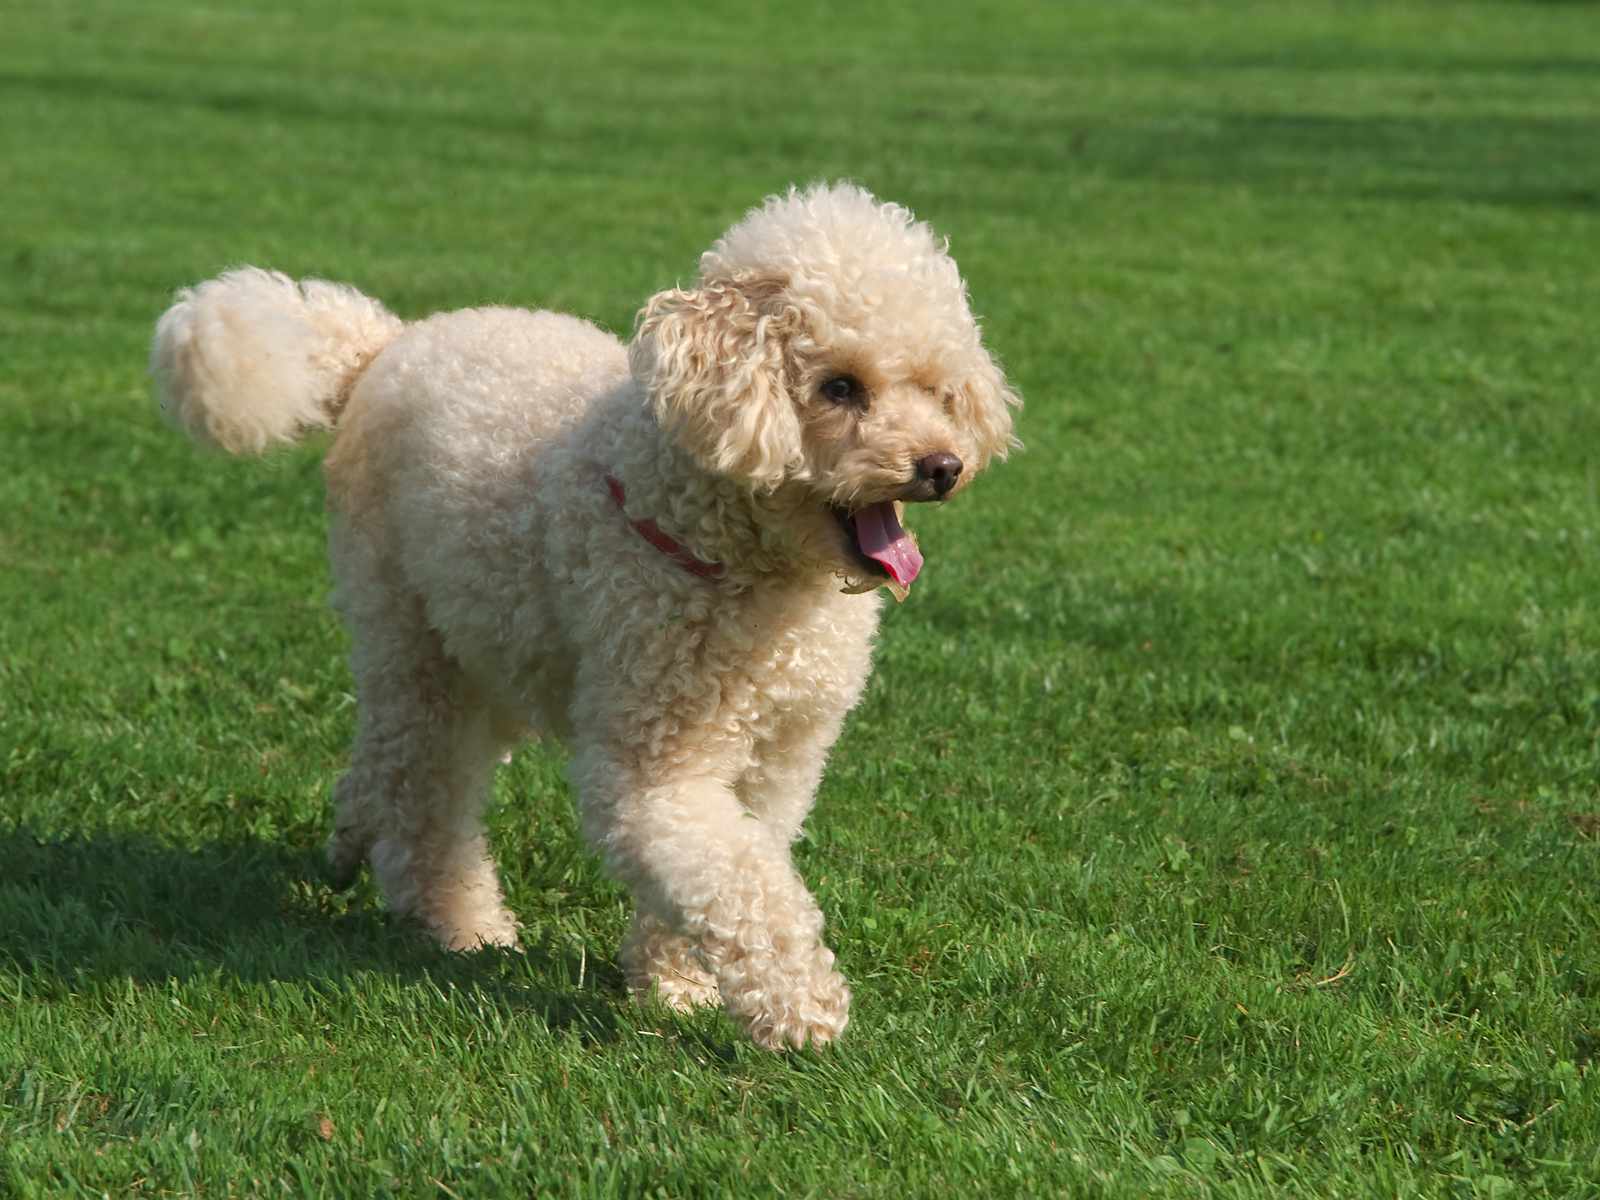 Poodle walking on grass